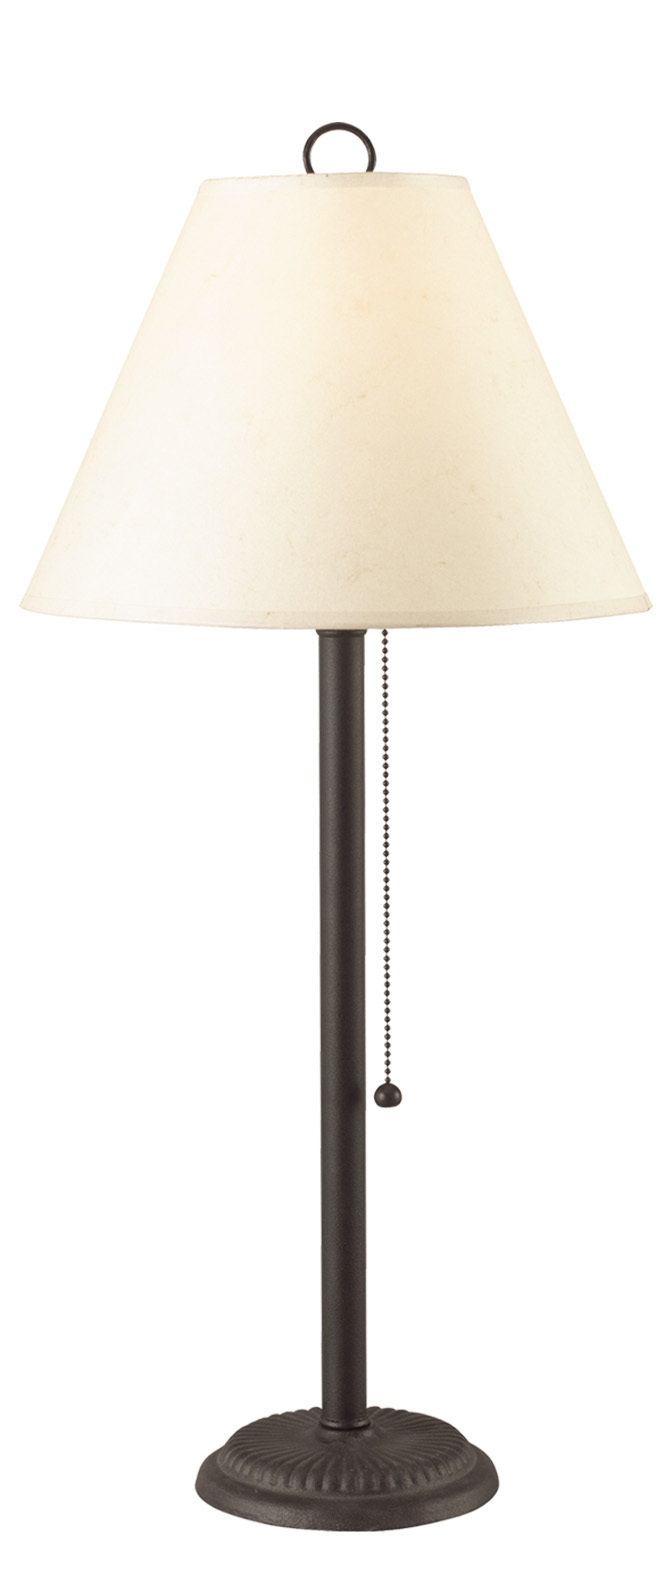 75W Candlestick Table Lamp W/Pull Chain Switch